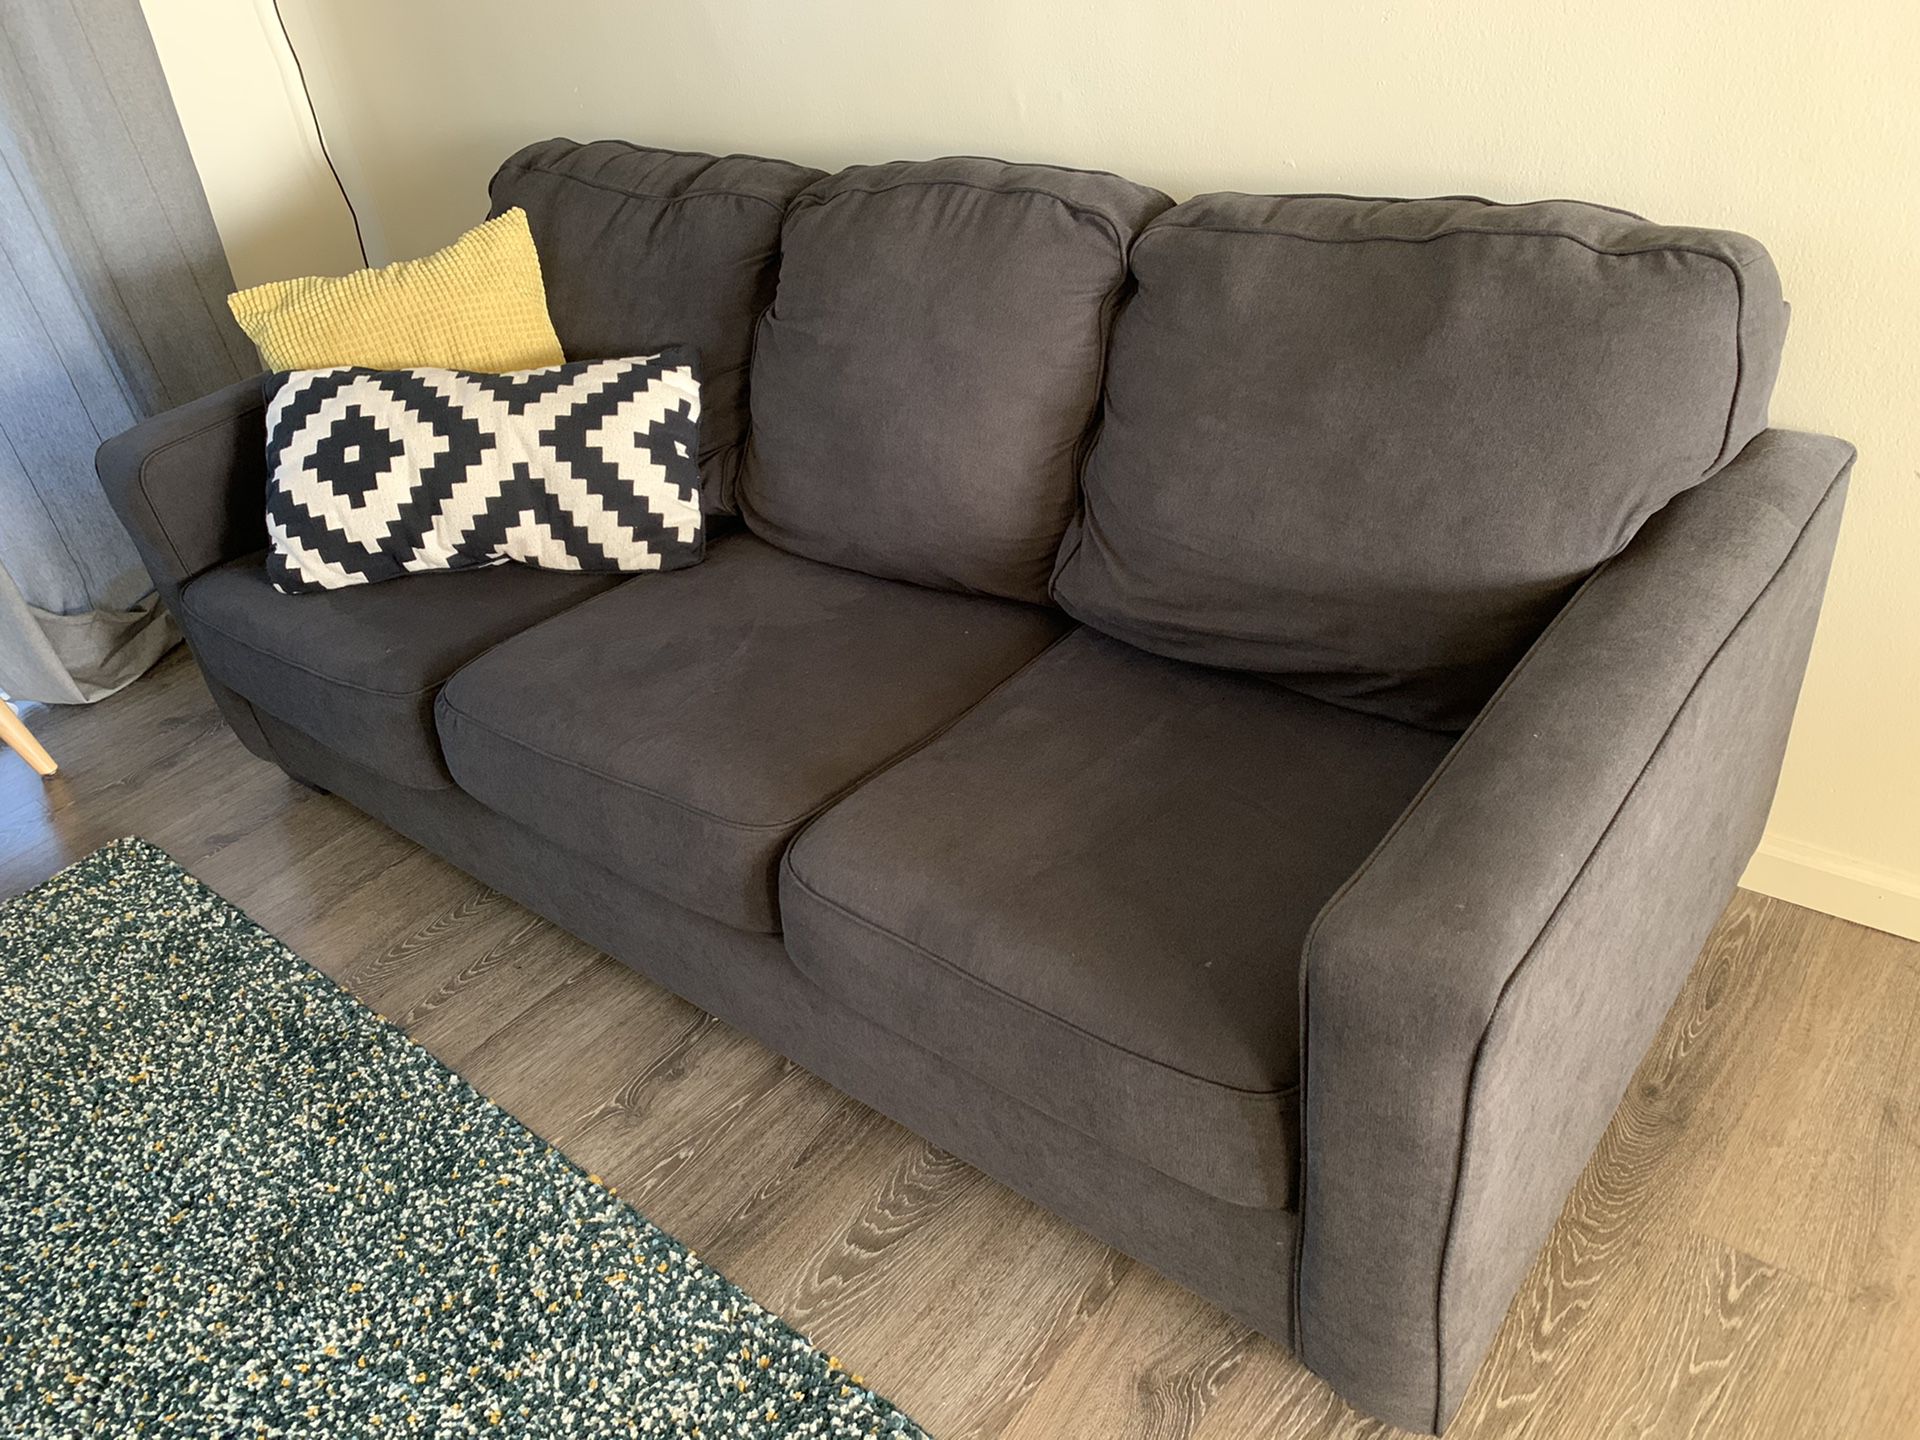 Sleeper Sofa/ pull out couch